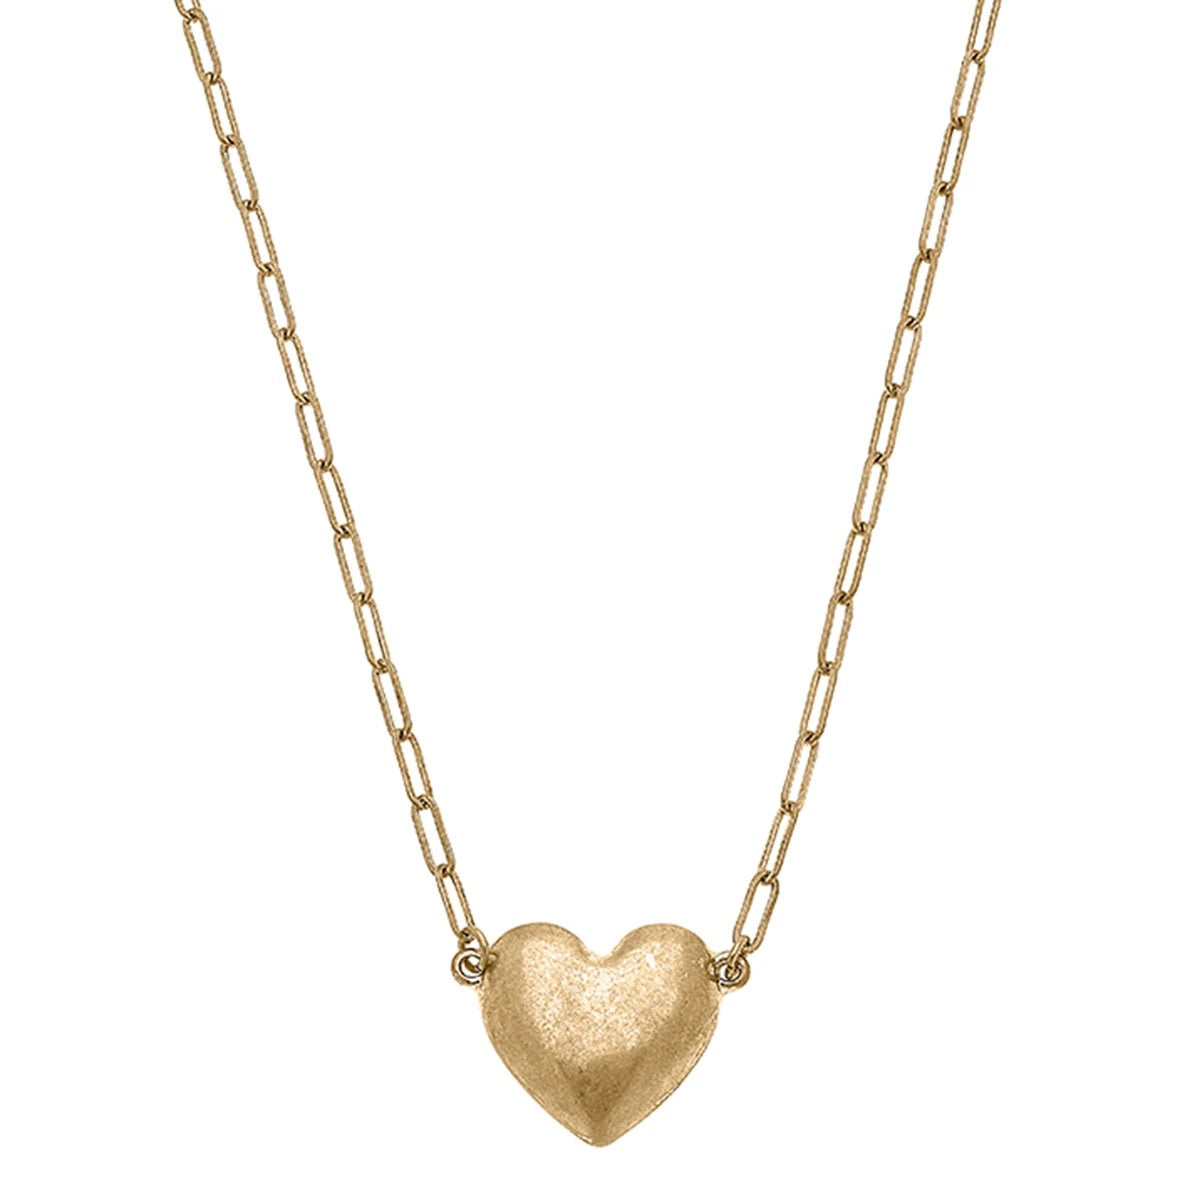 Necklaces- Canvas Shae Puffed Heart Paperclip Chain Necklace in Worn Gold